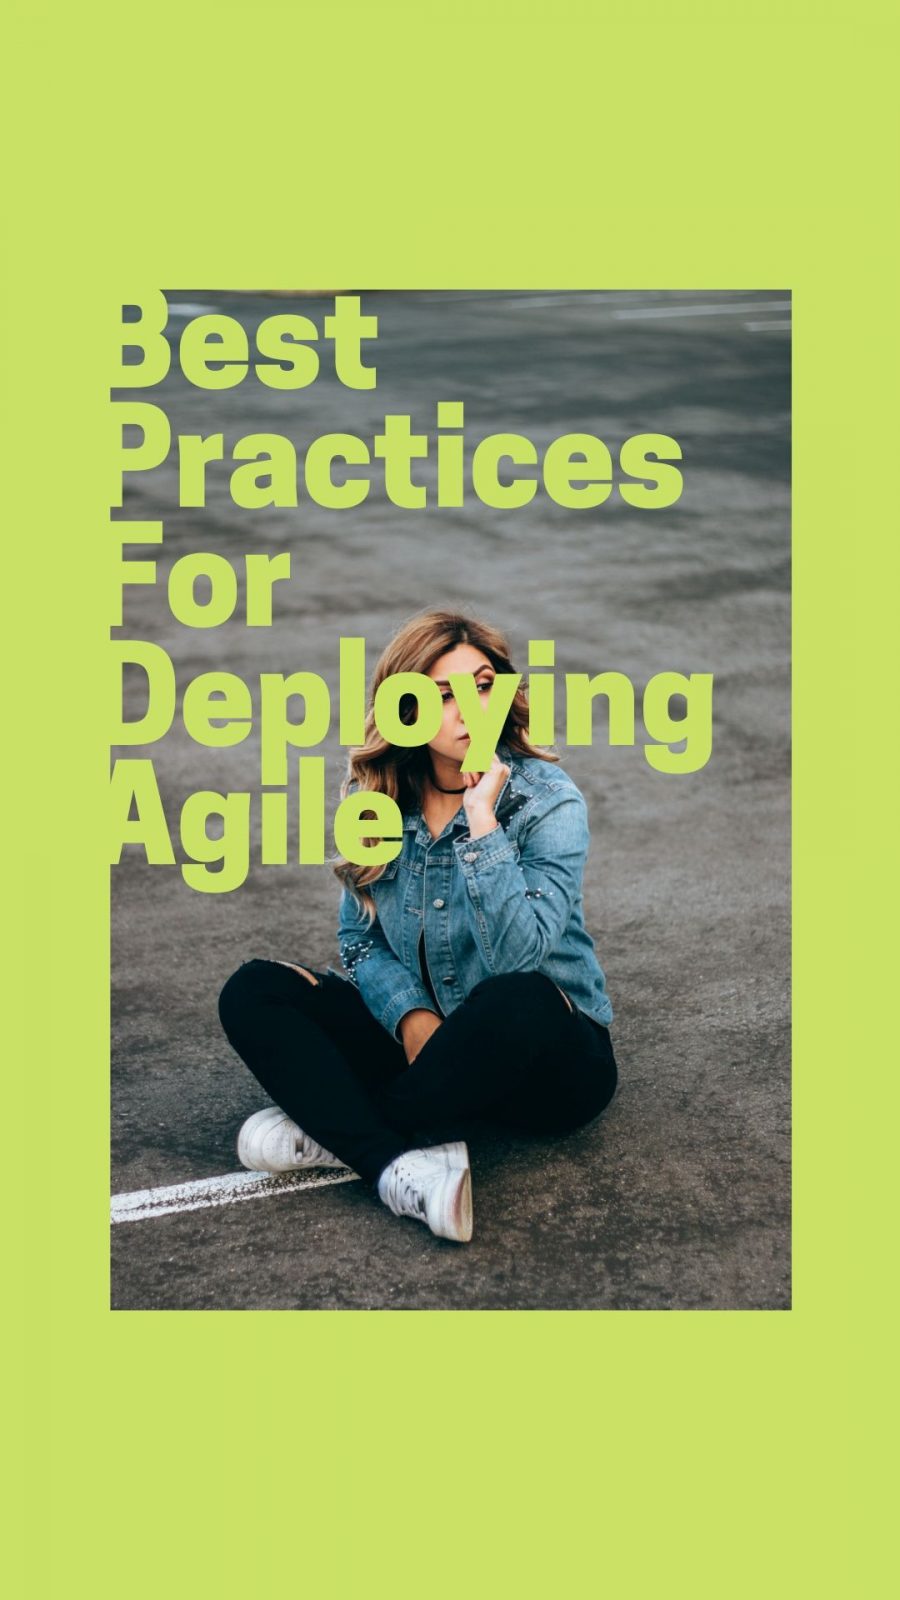 Best Practices For Deploying Agile